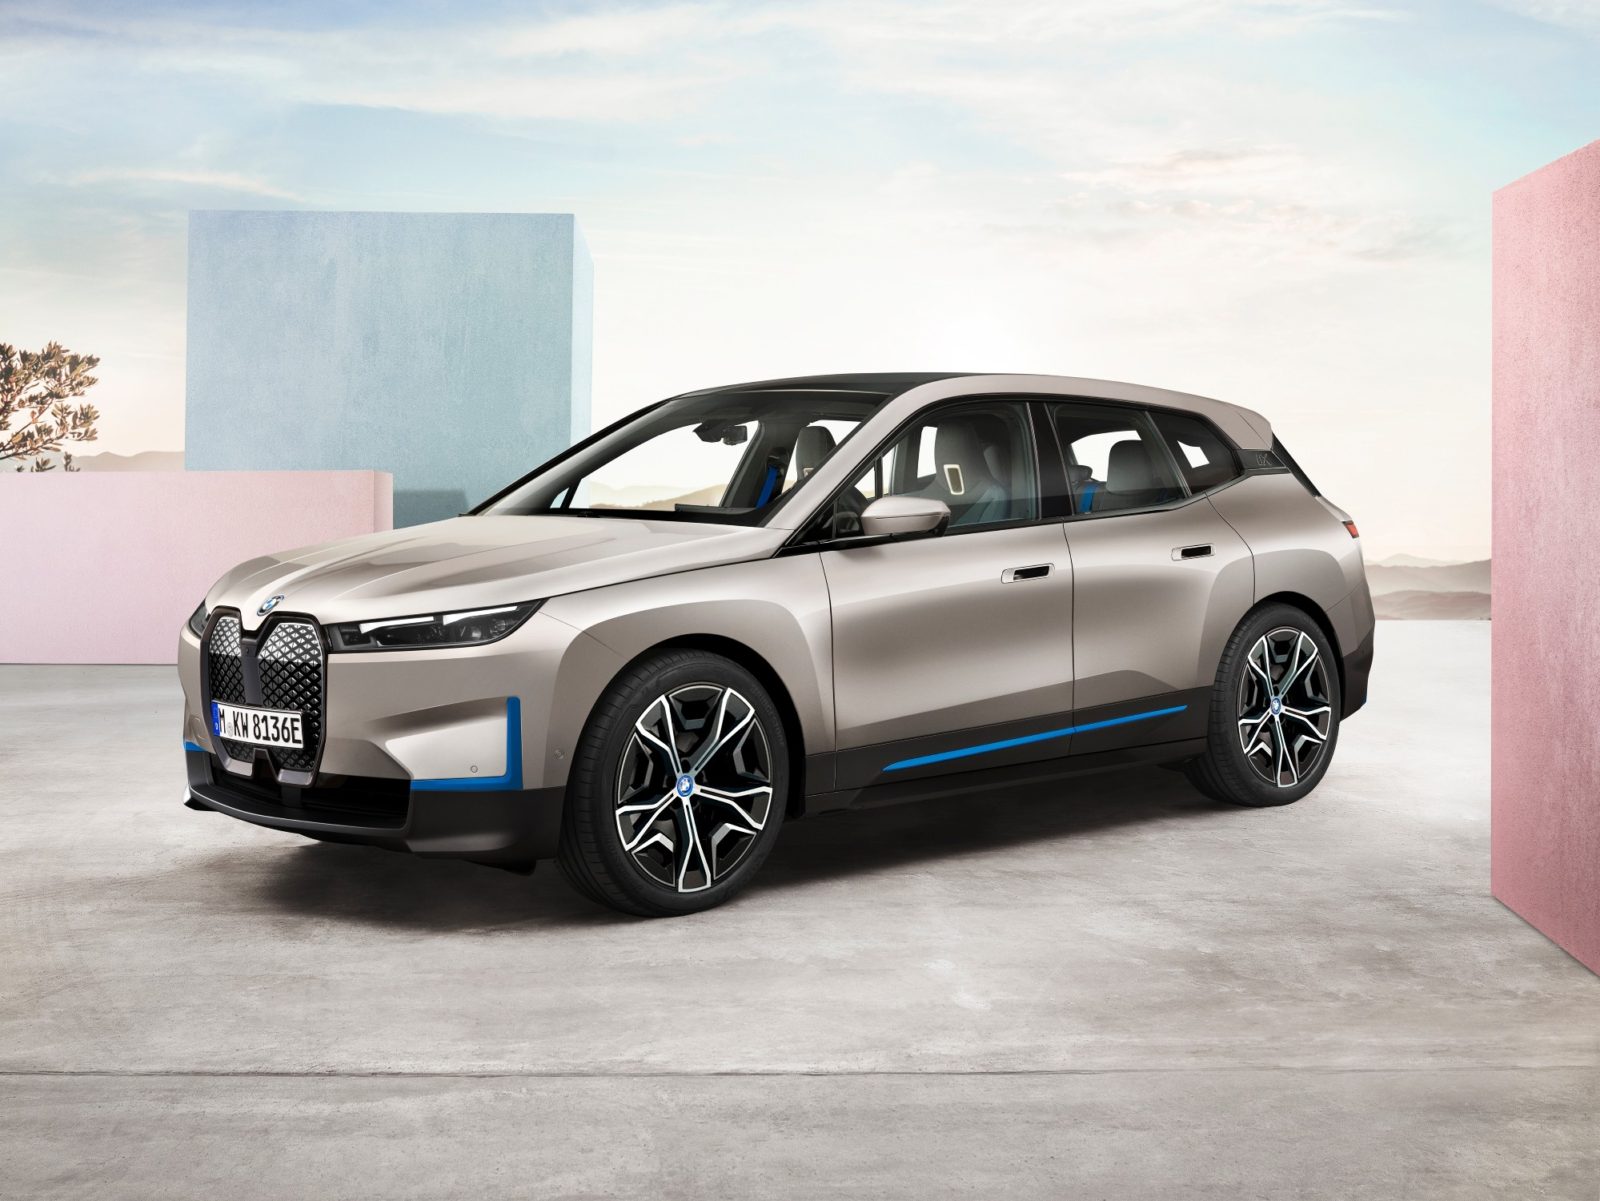 BMW Unveils iX, an AllElectric Vehicle Made for the Future